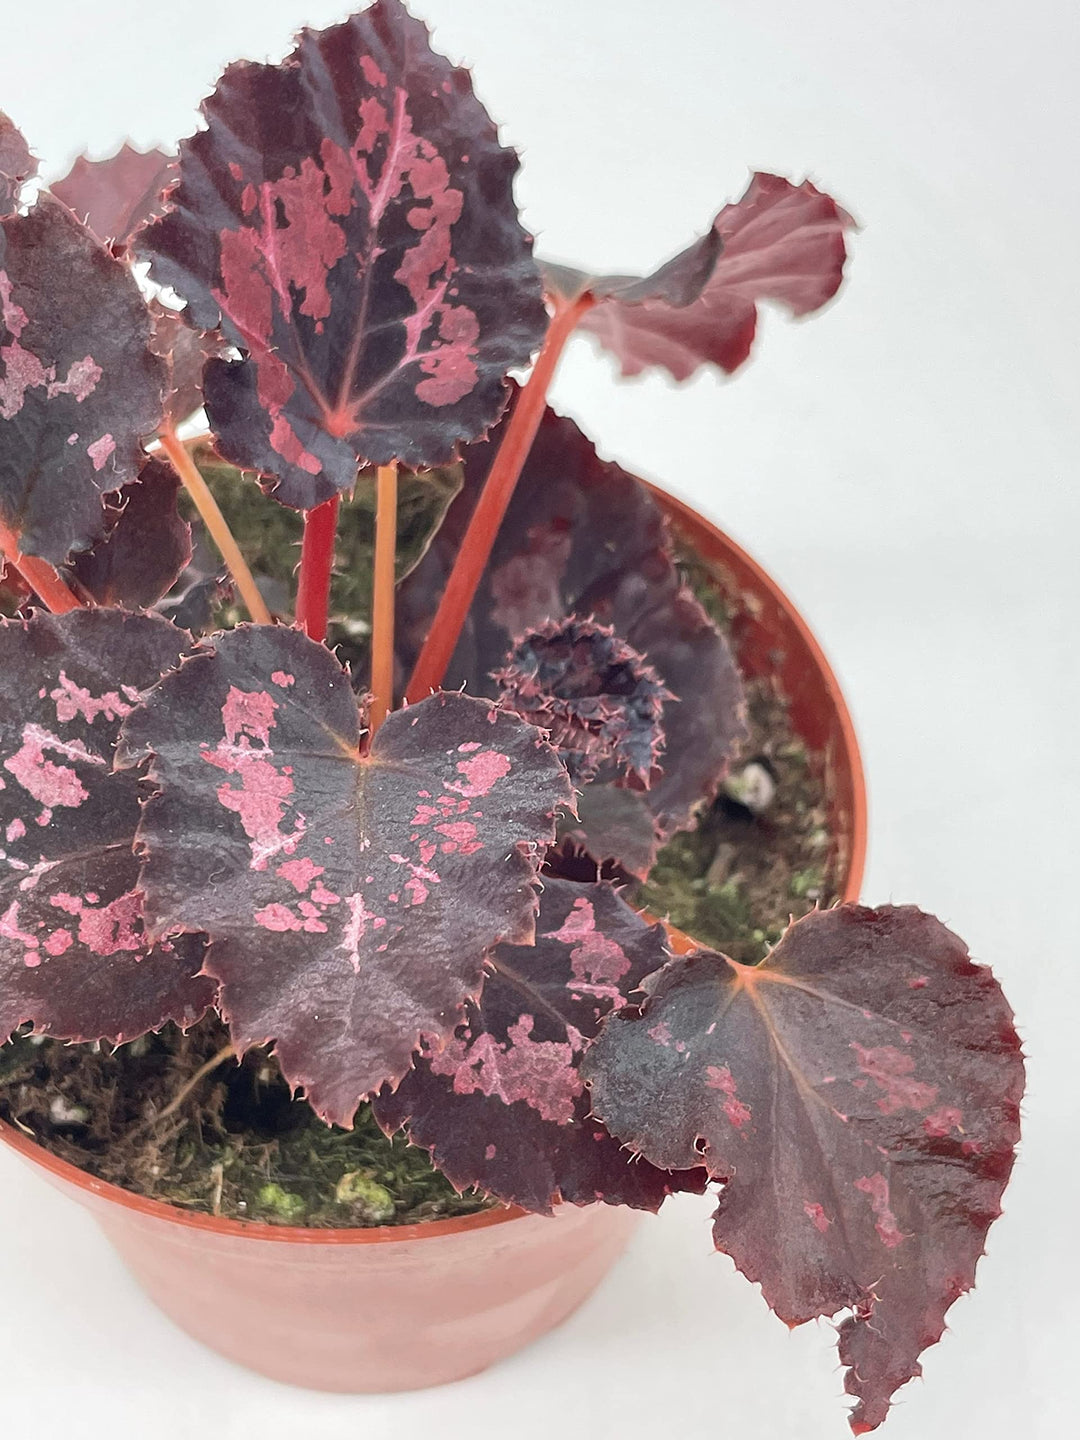 Harmony’s Black Heart, Begonia Rex, 4 inch, Painted-Leaf Begonia, Unique Homegrown Exclusive